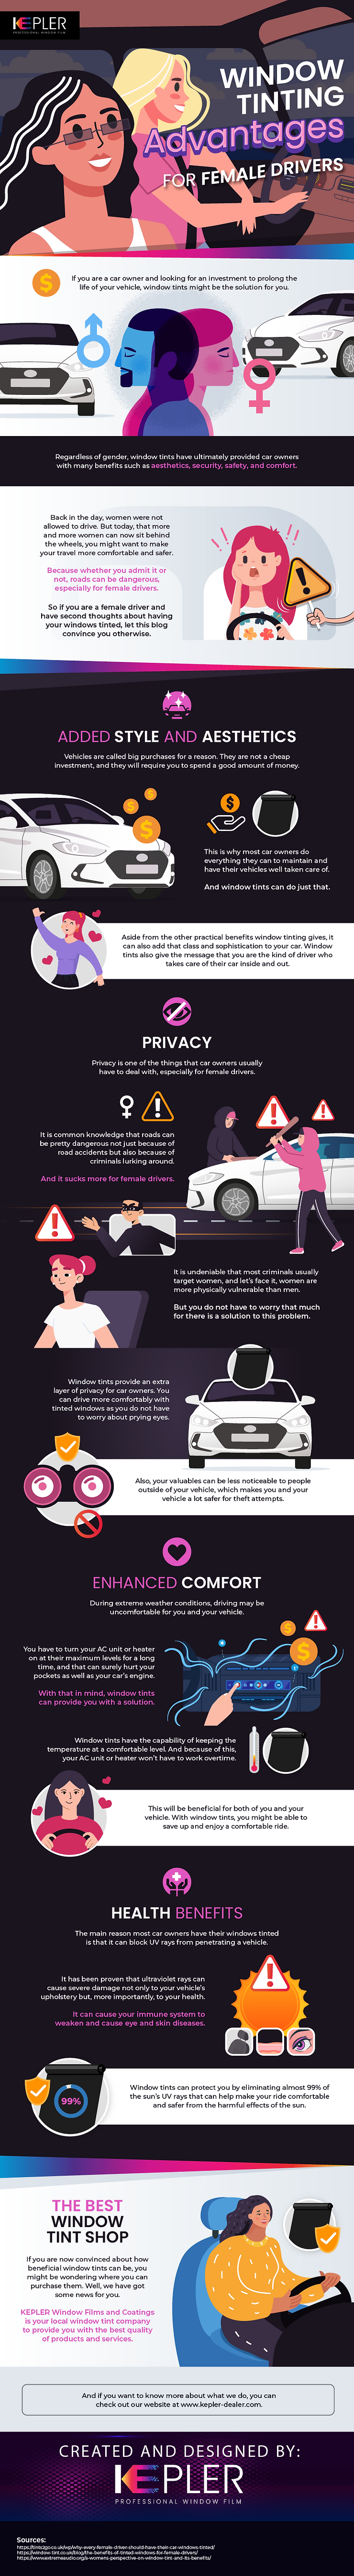 Window Tinting Advantages For Female Drivers - Infographic